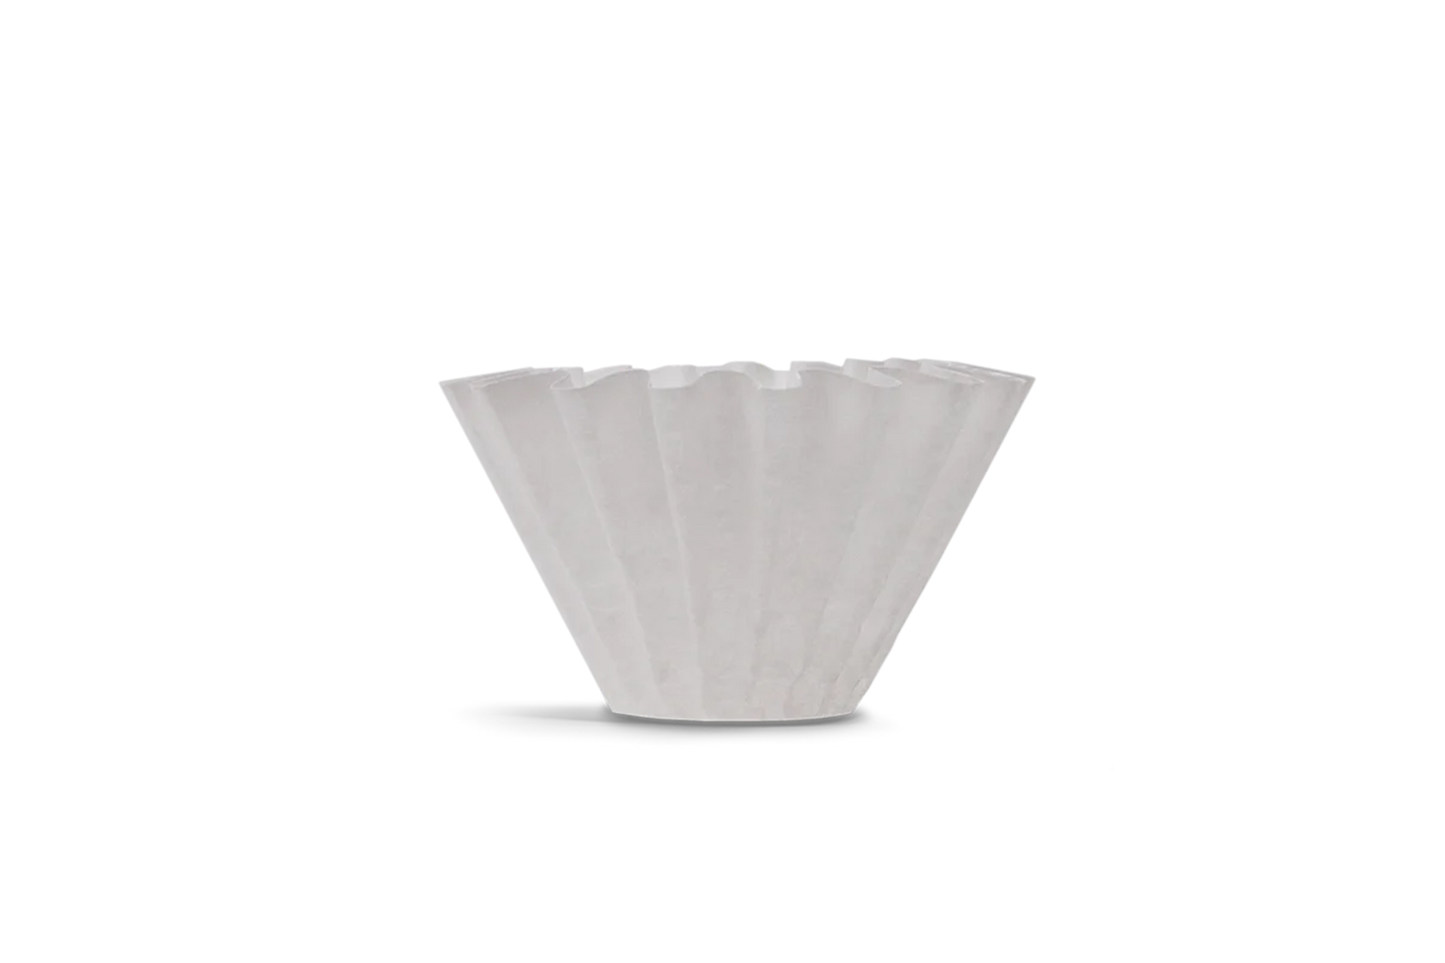 Filter papers designed specifically for the Fellow Products Stagg [X] Pourover.